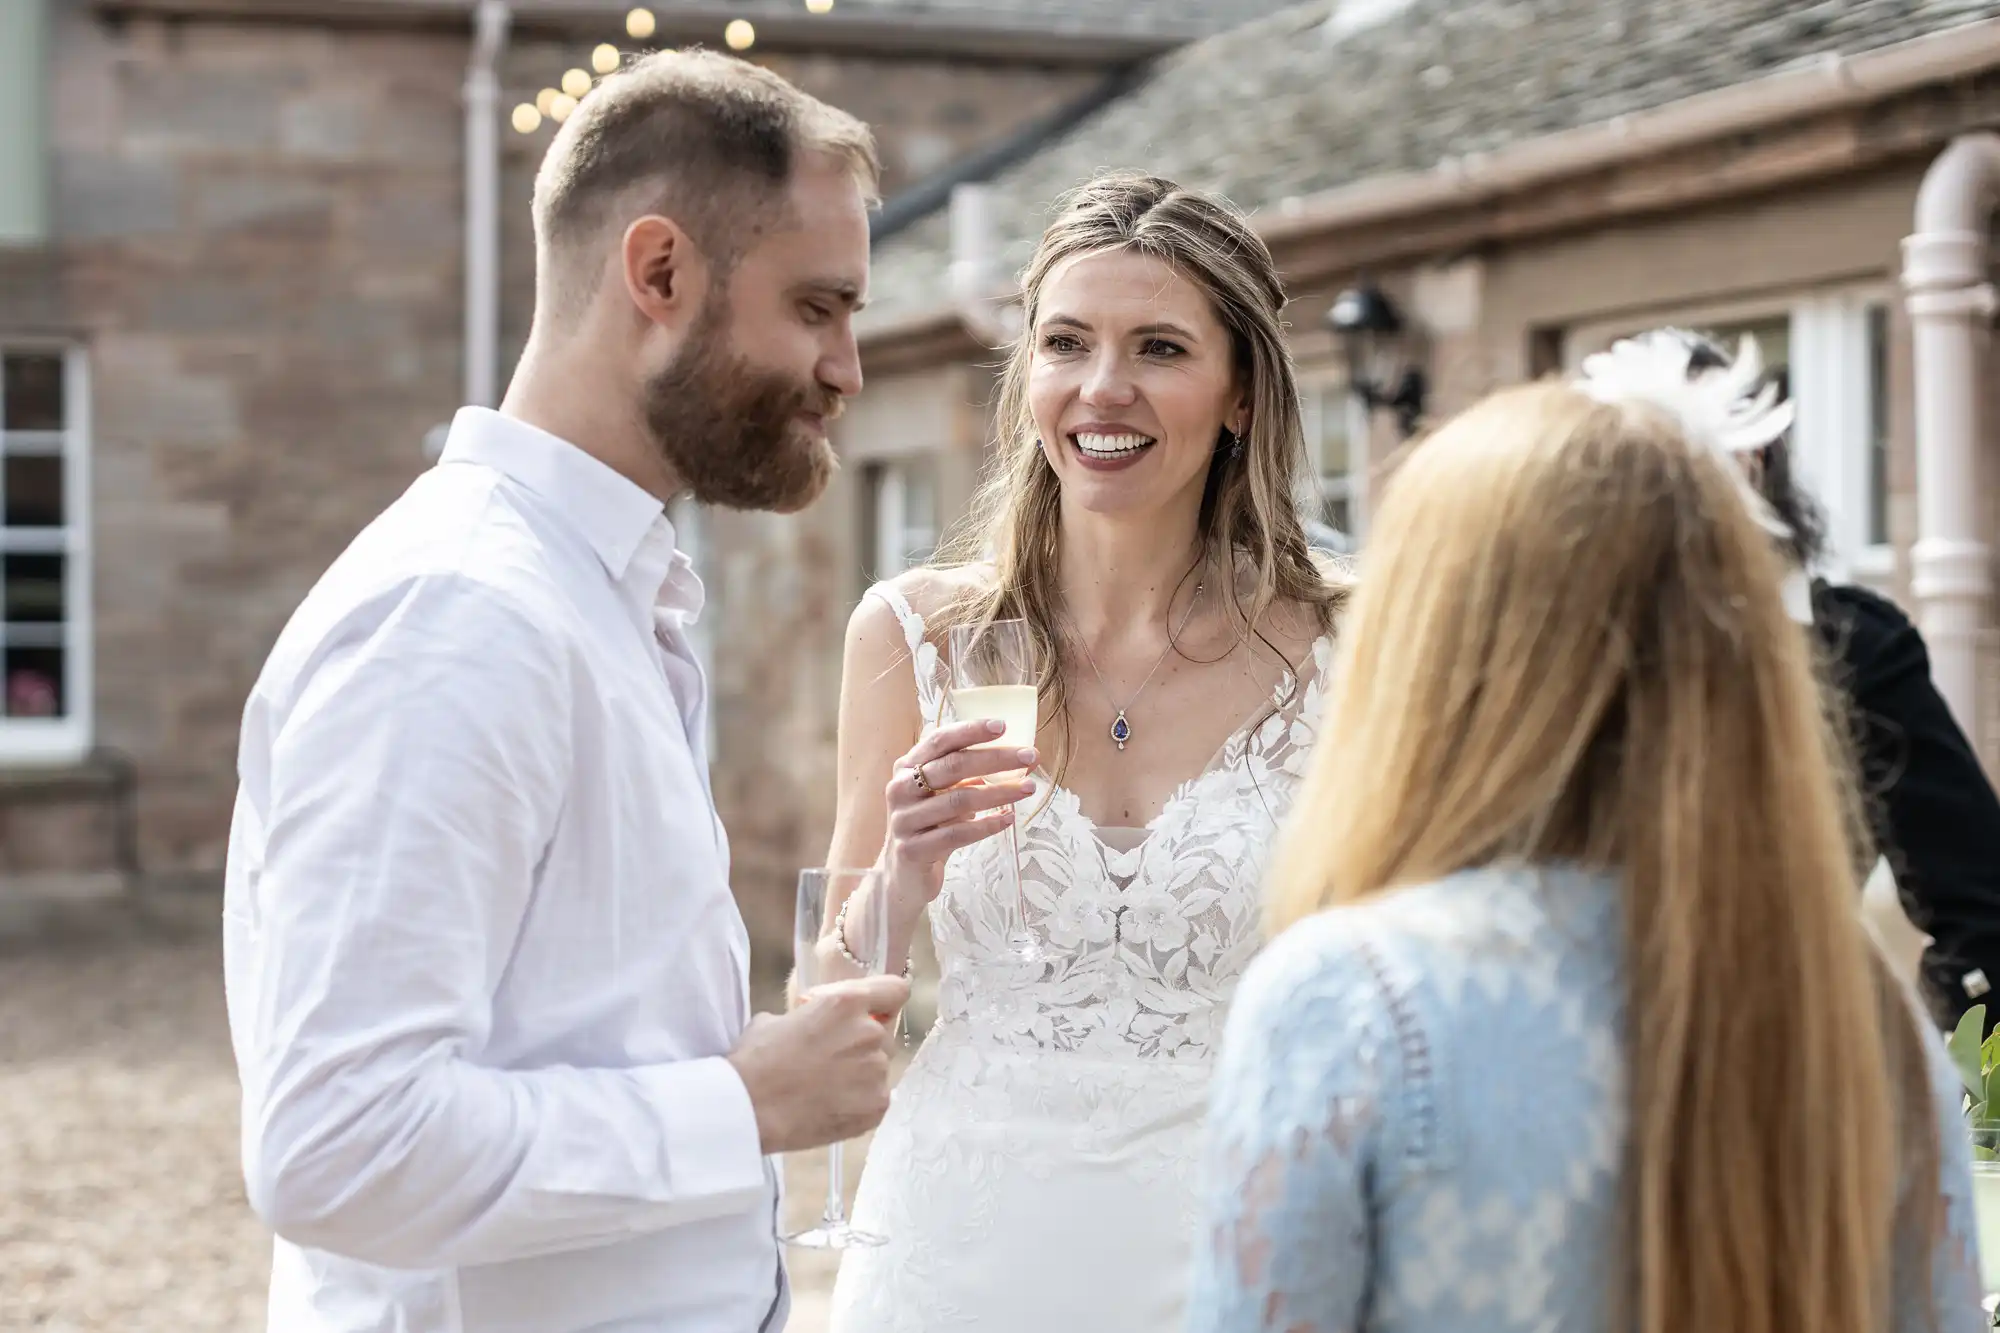 A bride in a white dress holds a glass and smiles while talking to a bearded man and a woman with long hair at an outdoor event.